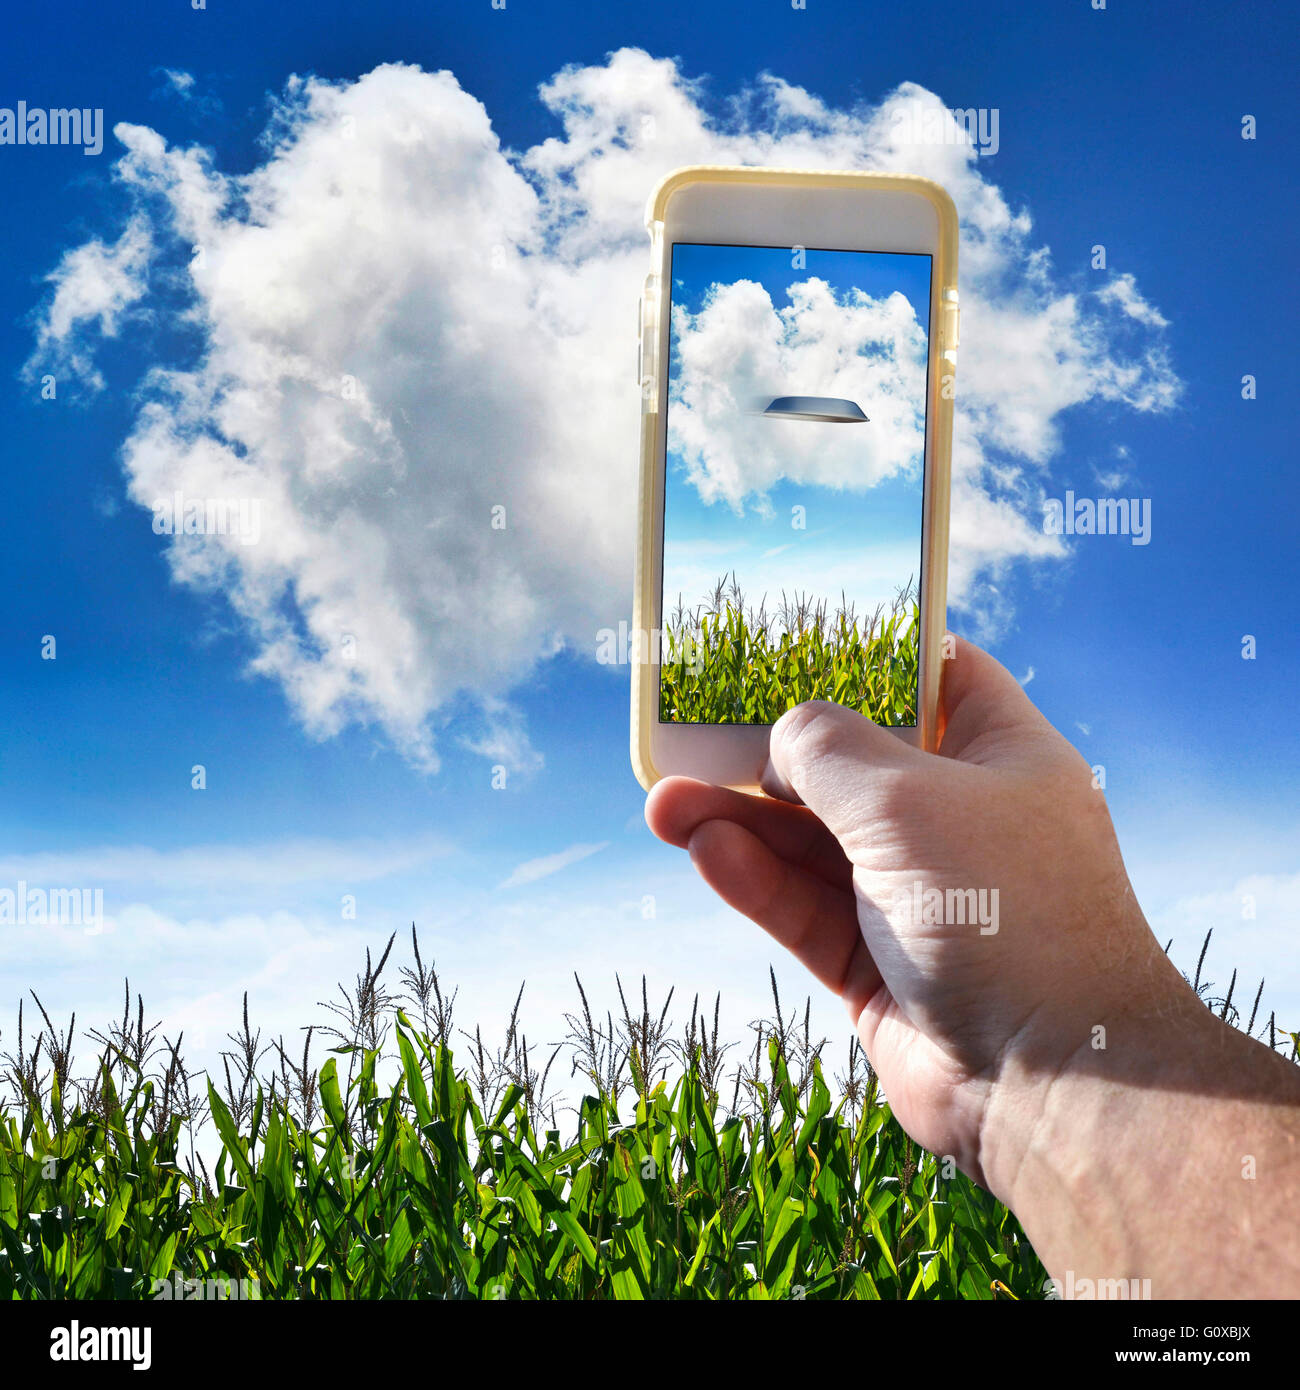 Hand Holding Cell Phone in Cornfield Stock Photo